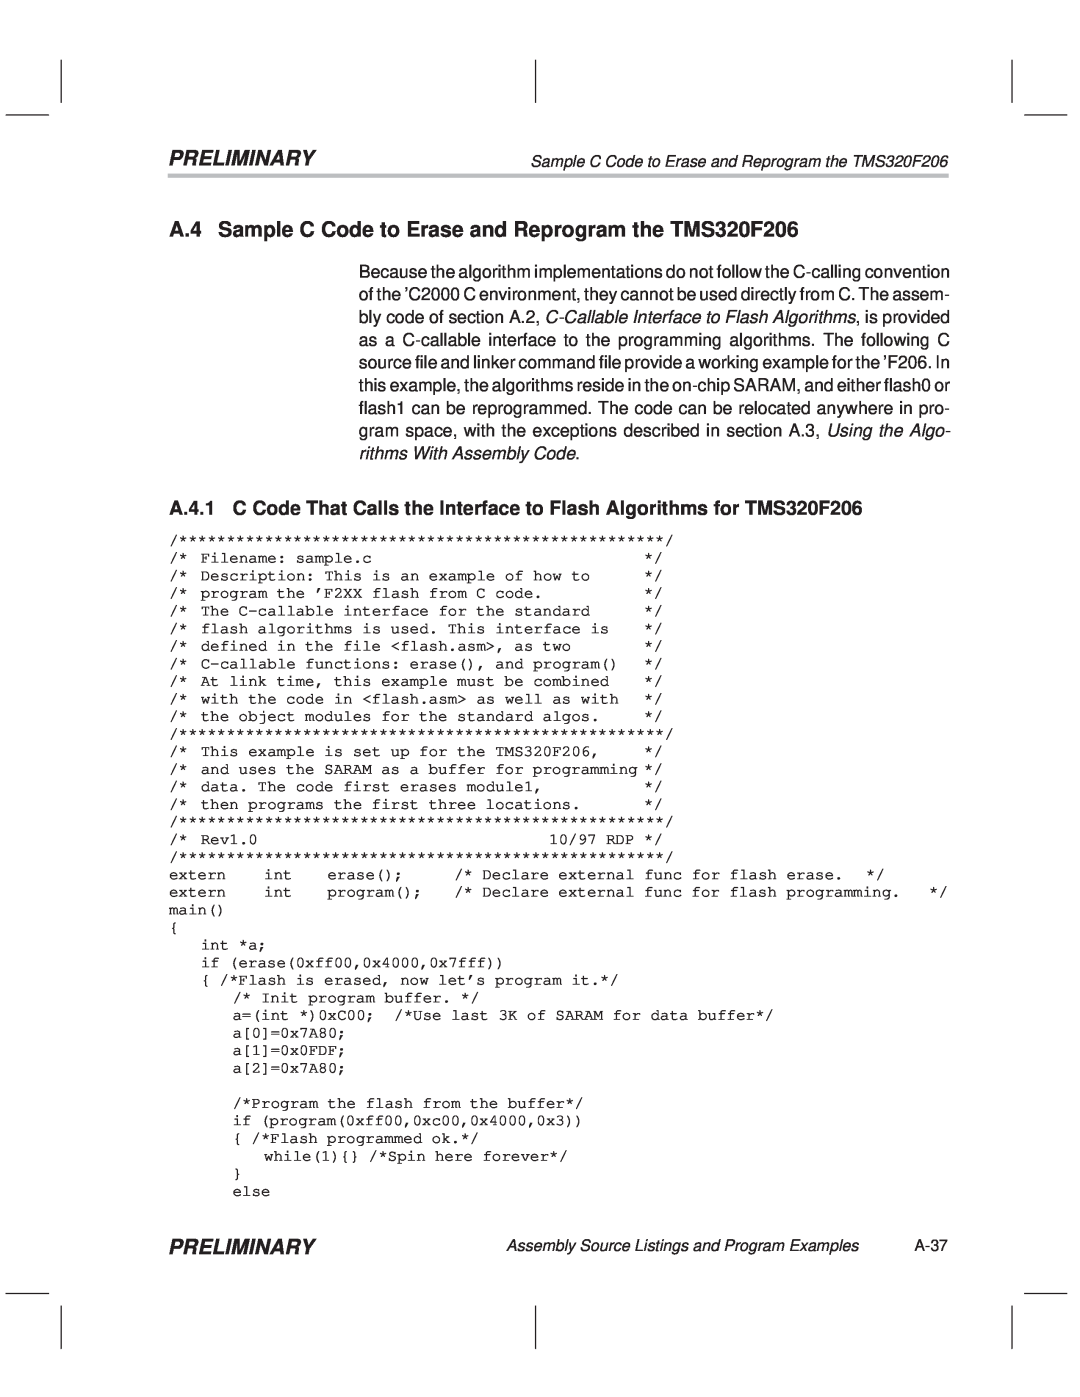 Texas Instruments TMS320F20x/F24x DSP manual A.4 Sample C Code to Erase and Reprogram the TMS320F206, Preliminary 